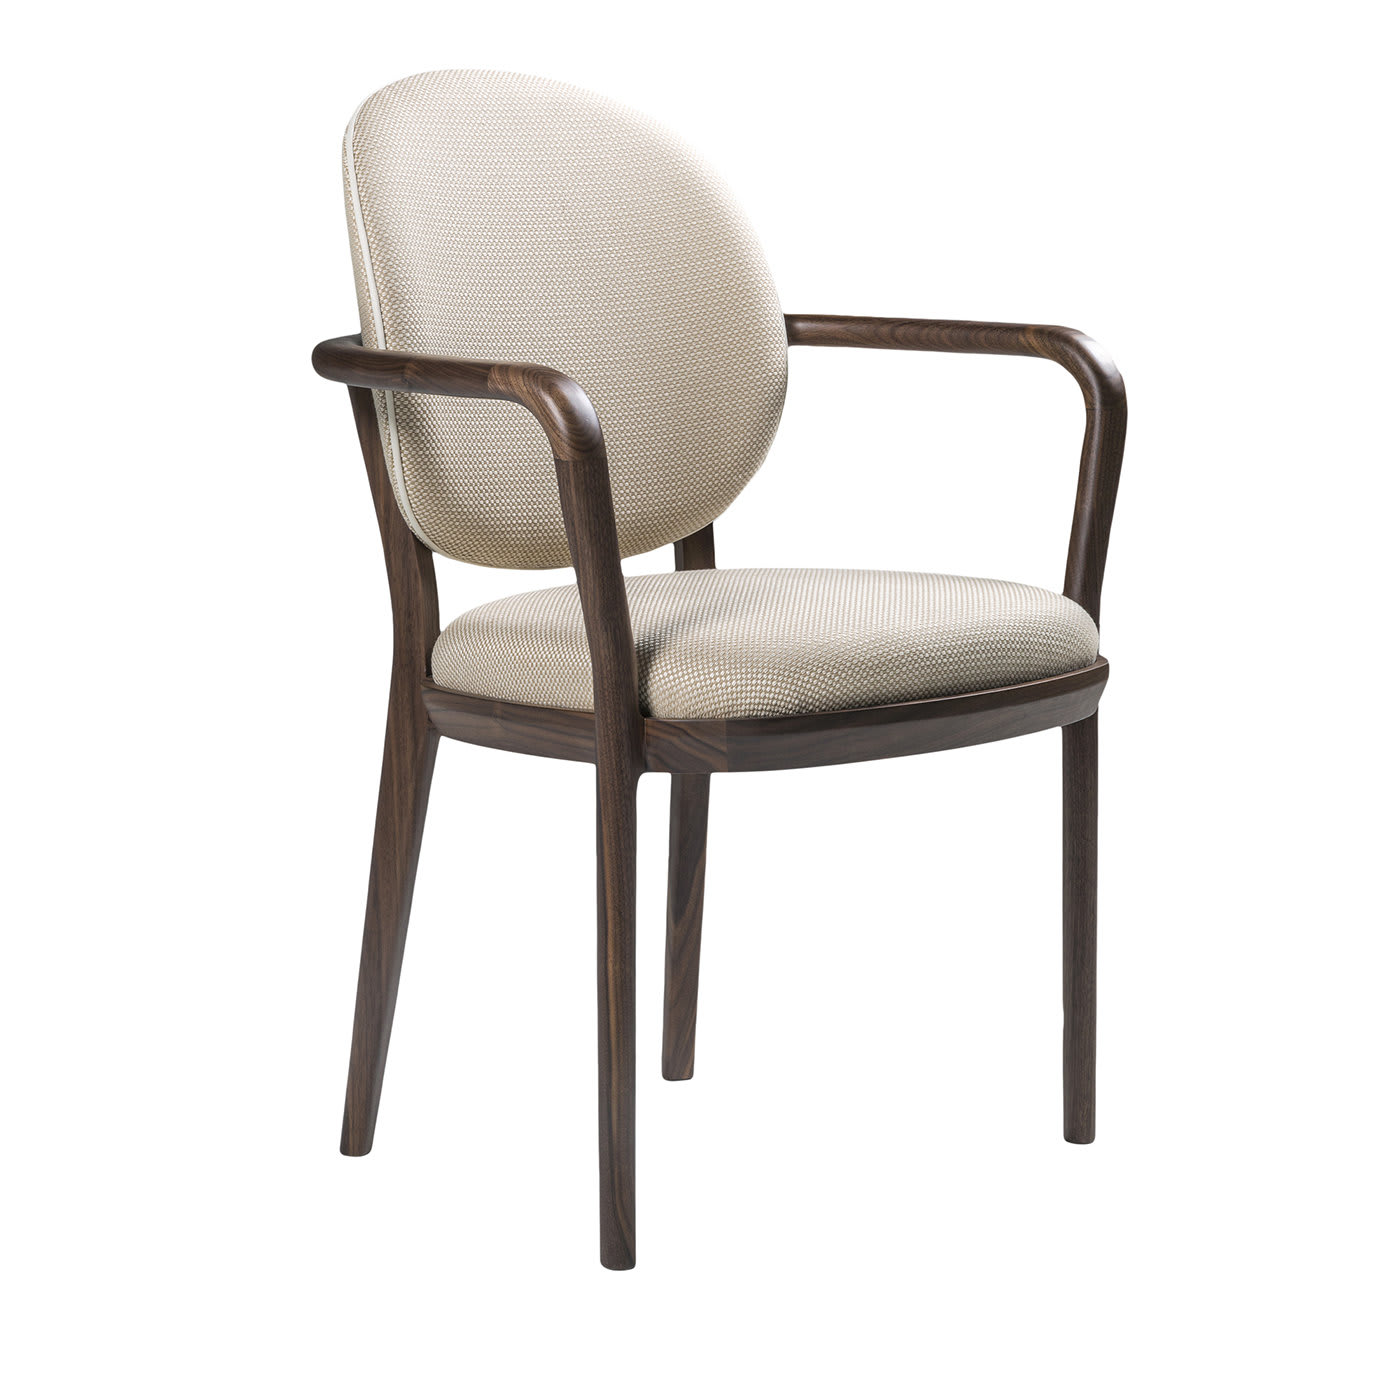 Giulietta Dining Chair - Annibale Colombo